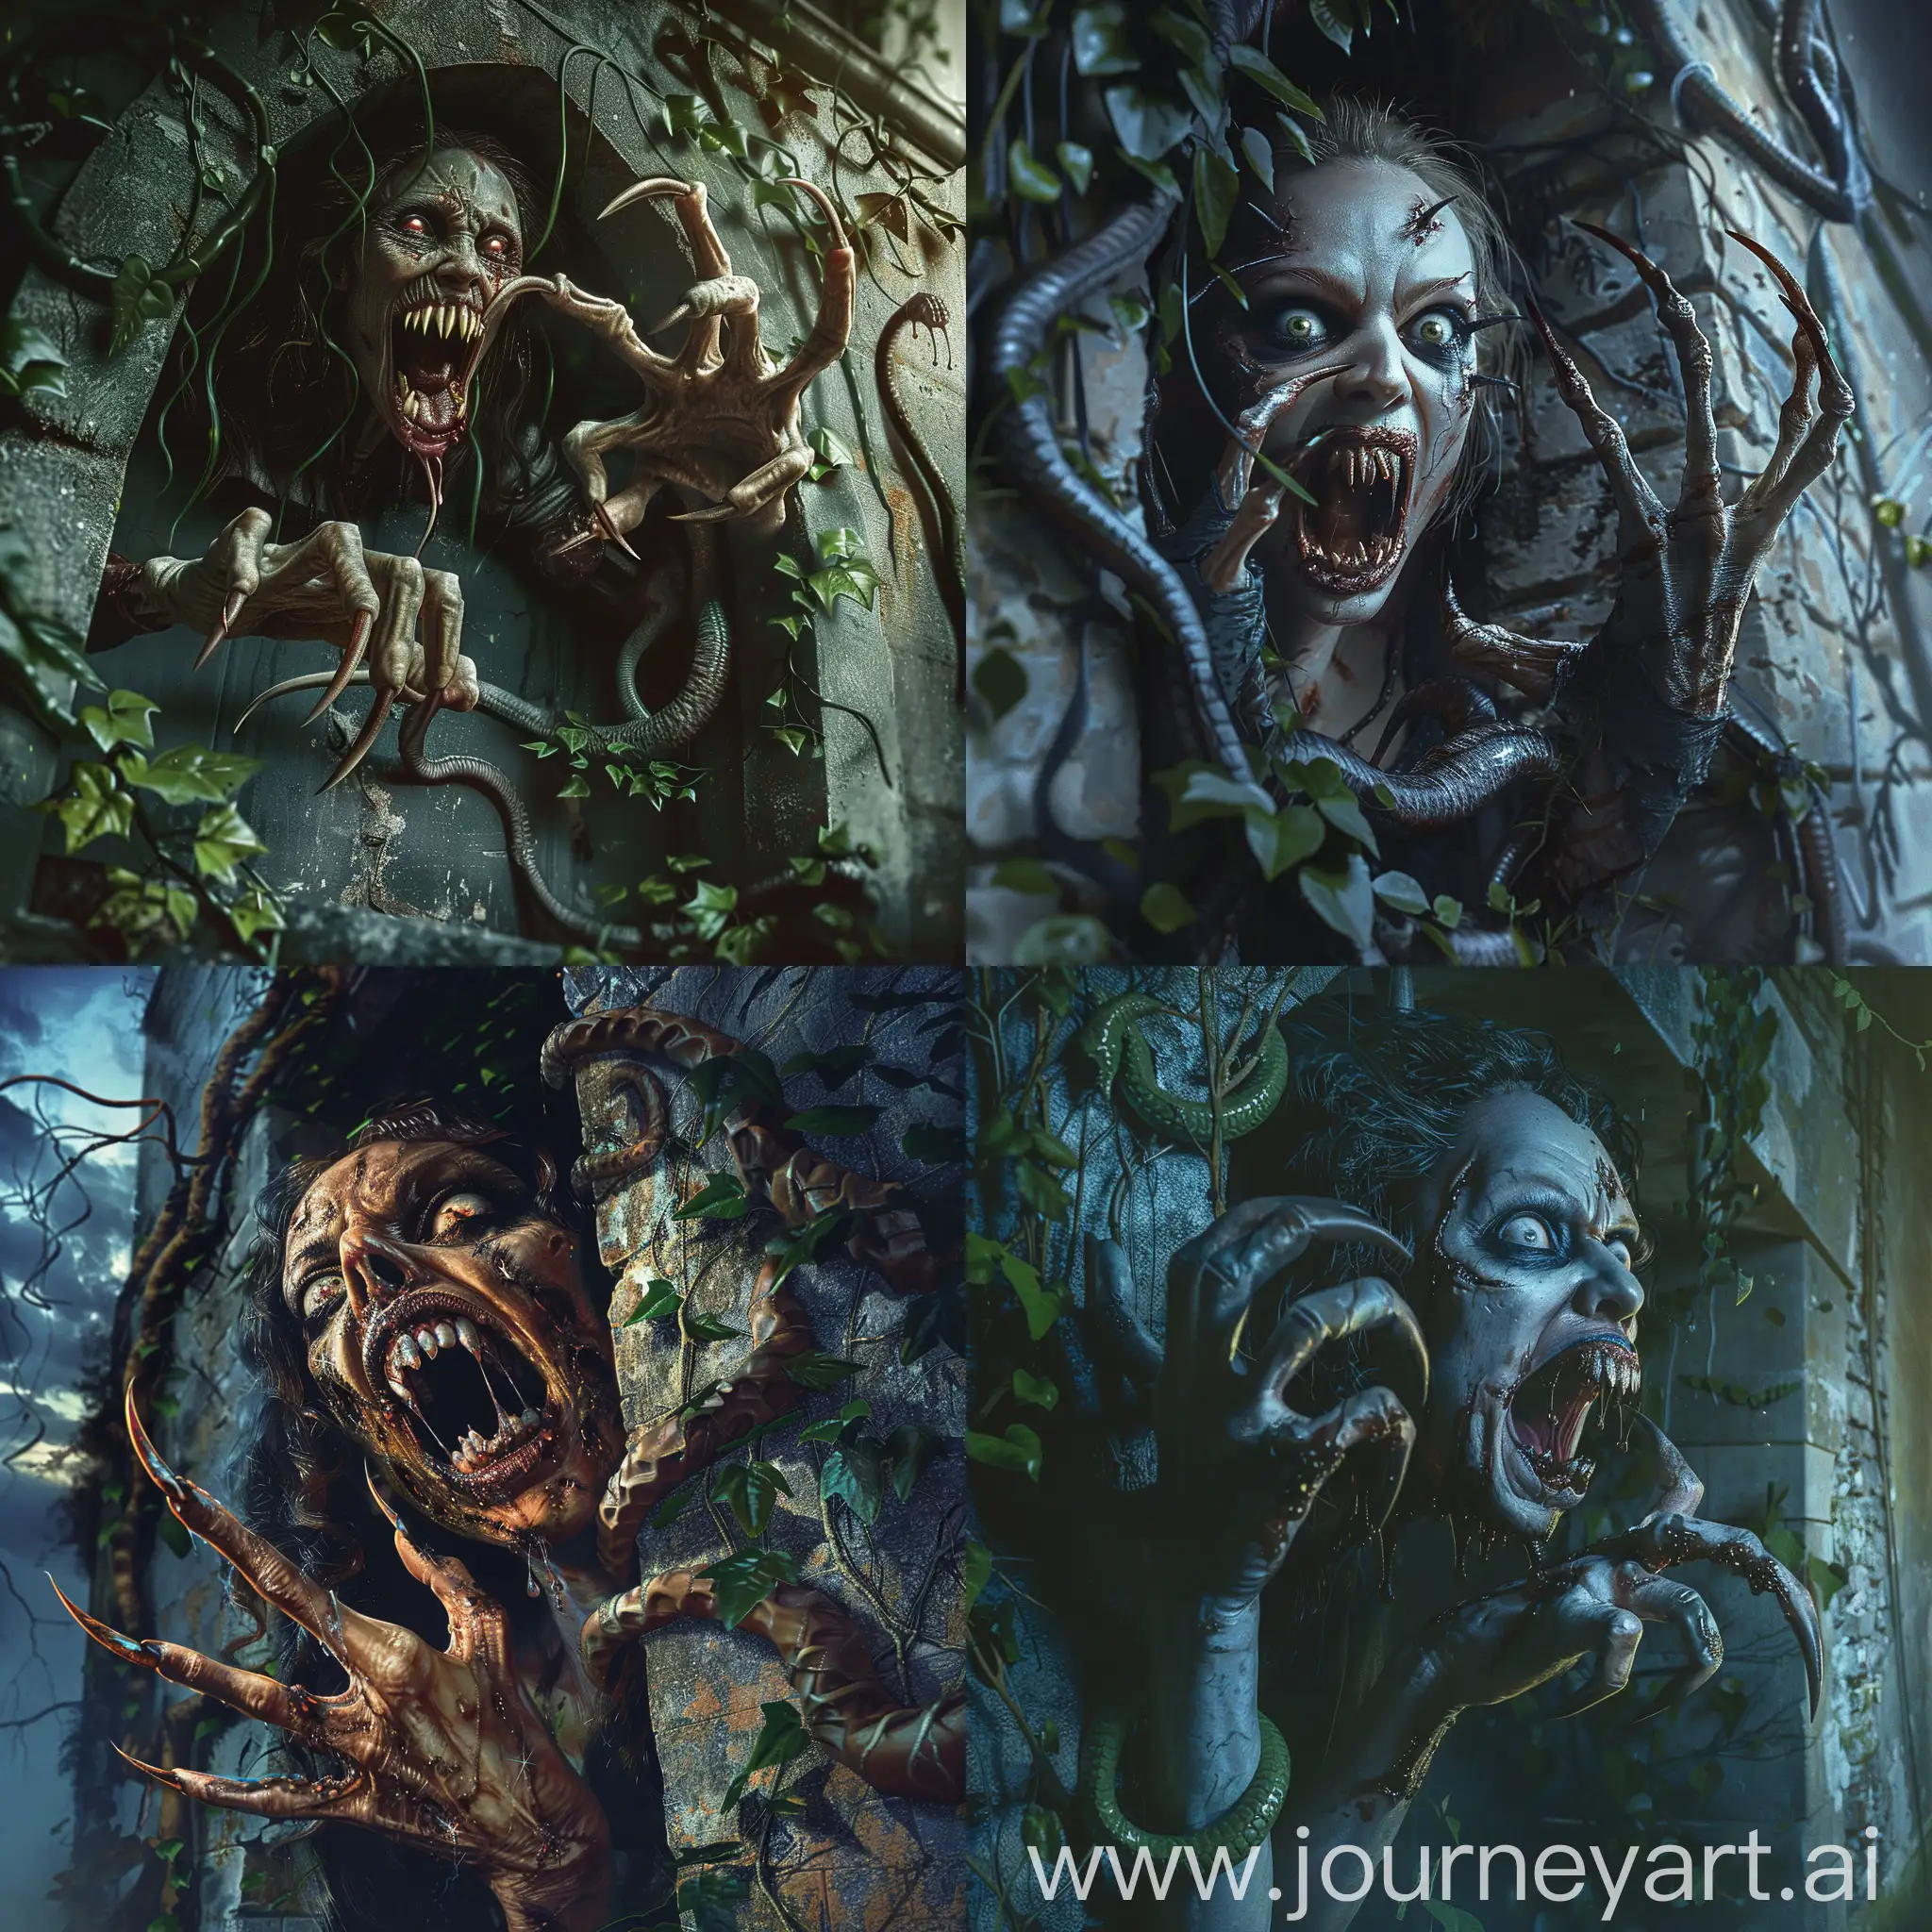 A Terrible Zombie woman with long curved pointed nails protruding from her fingers like menacing claws, she looks like a who has climbed out of the grave, her mouth is threateningly open exposing pointed teeth resembling fangs, The scene takes place at night, in an abandoned building partially covered with ivy with green vines and snakes like plants, very scary. Photorealistic, Concept Art, High